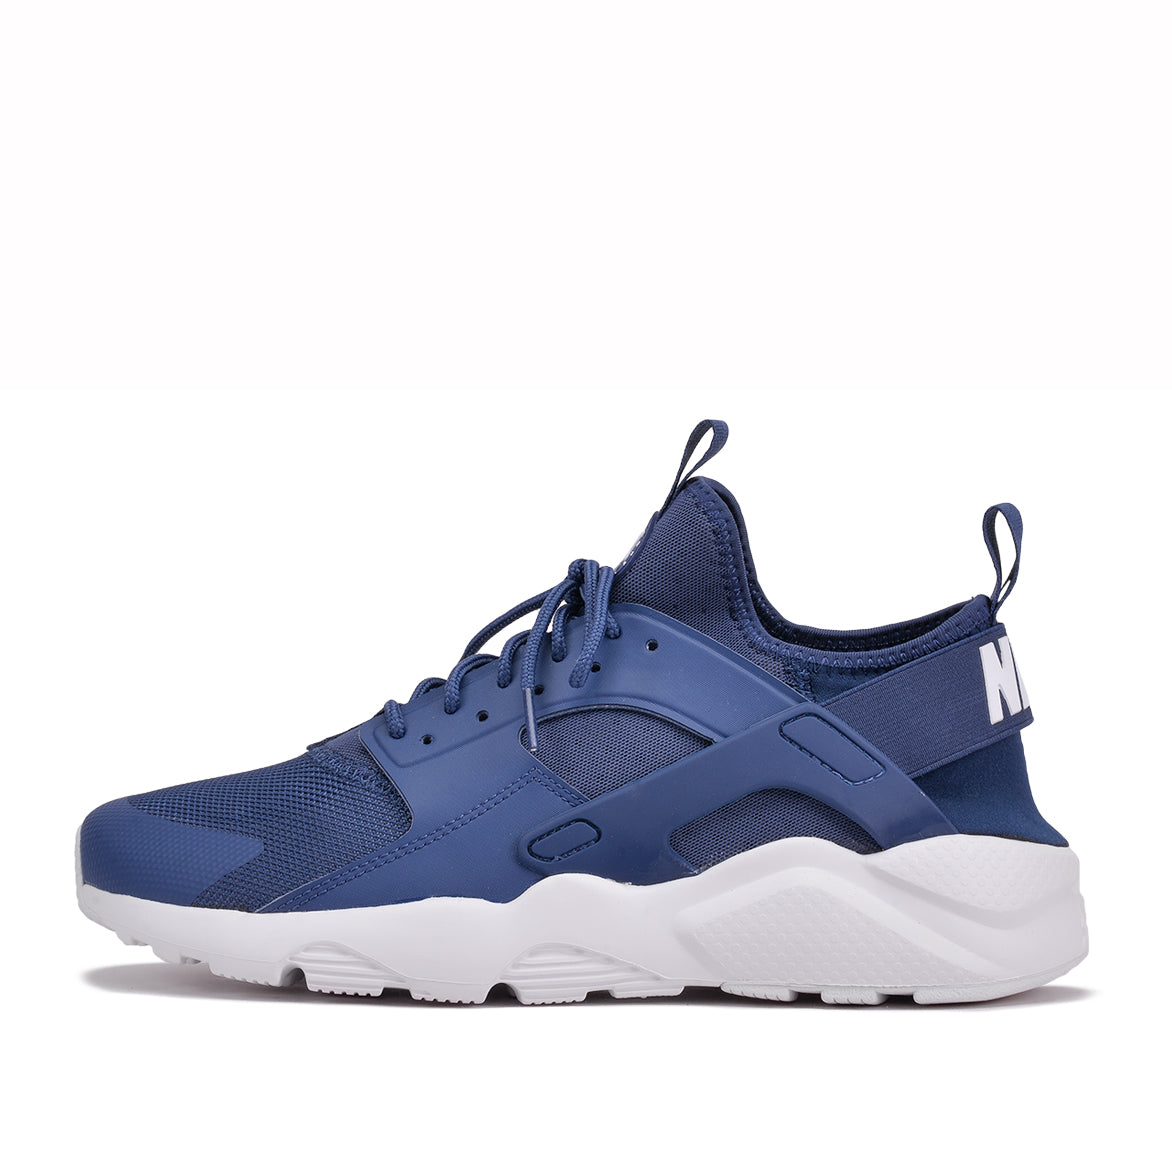 huaraches navy blue and white